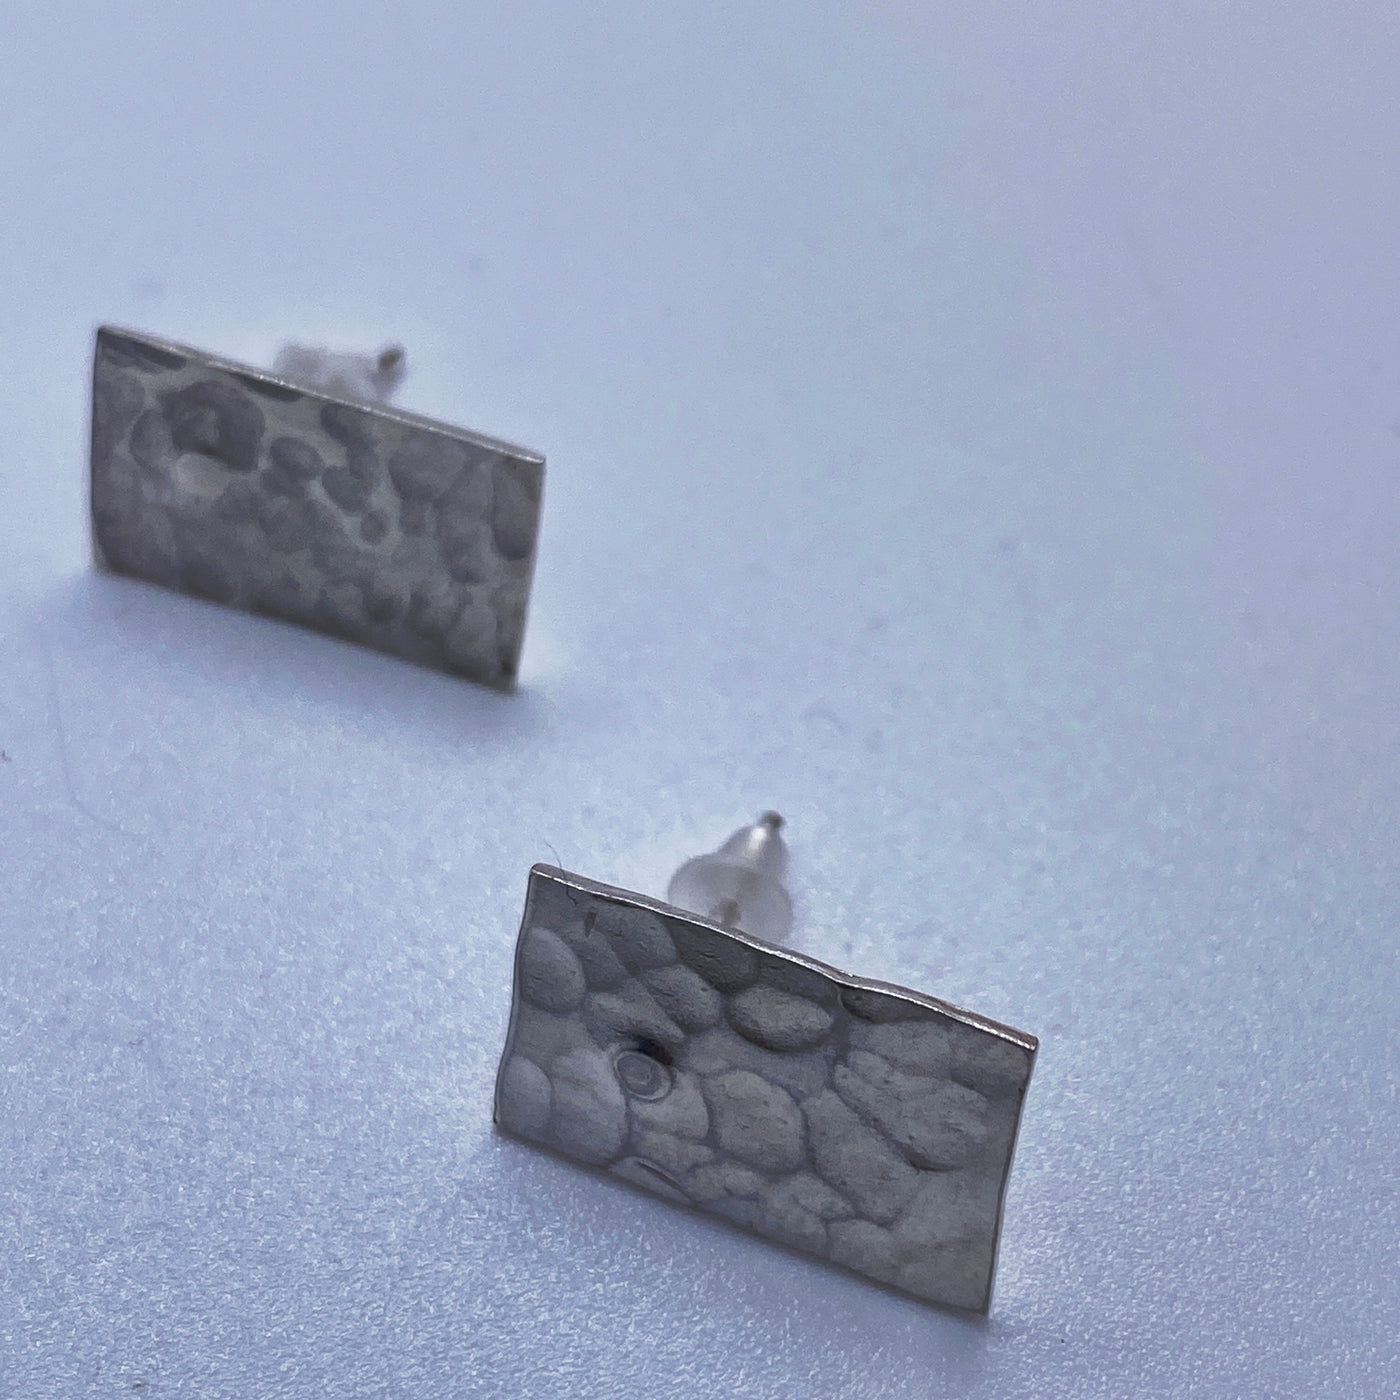 Rectangular sterling silver studs 1.5 x 0.8 cm texturized 2g 